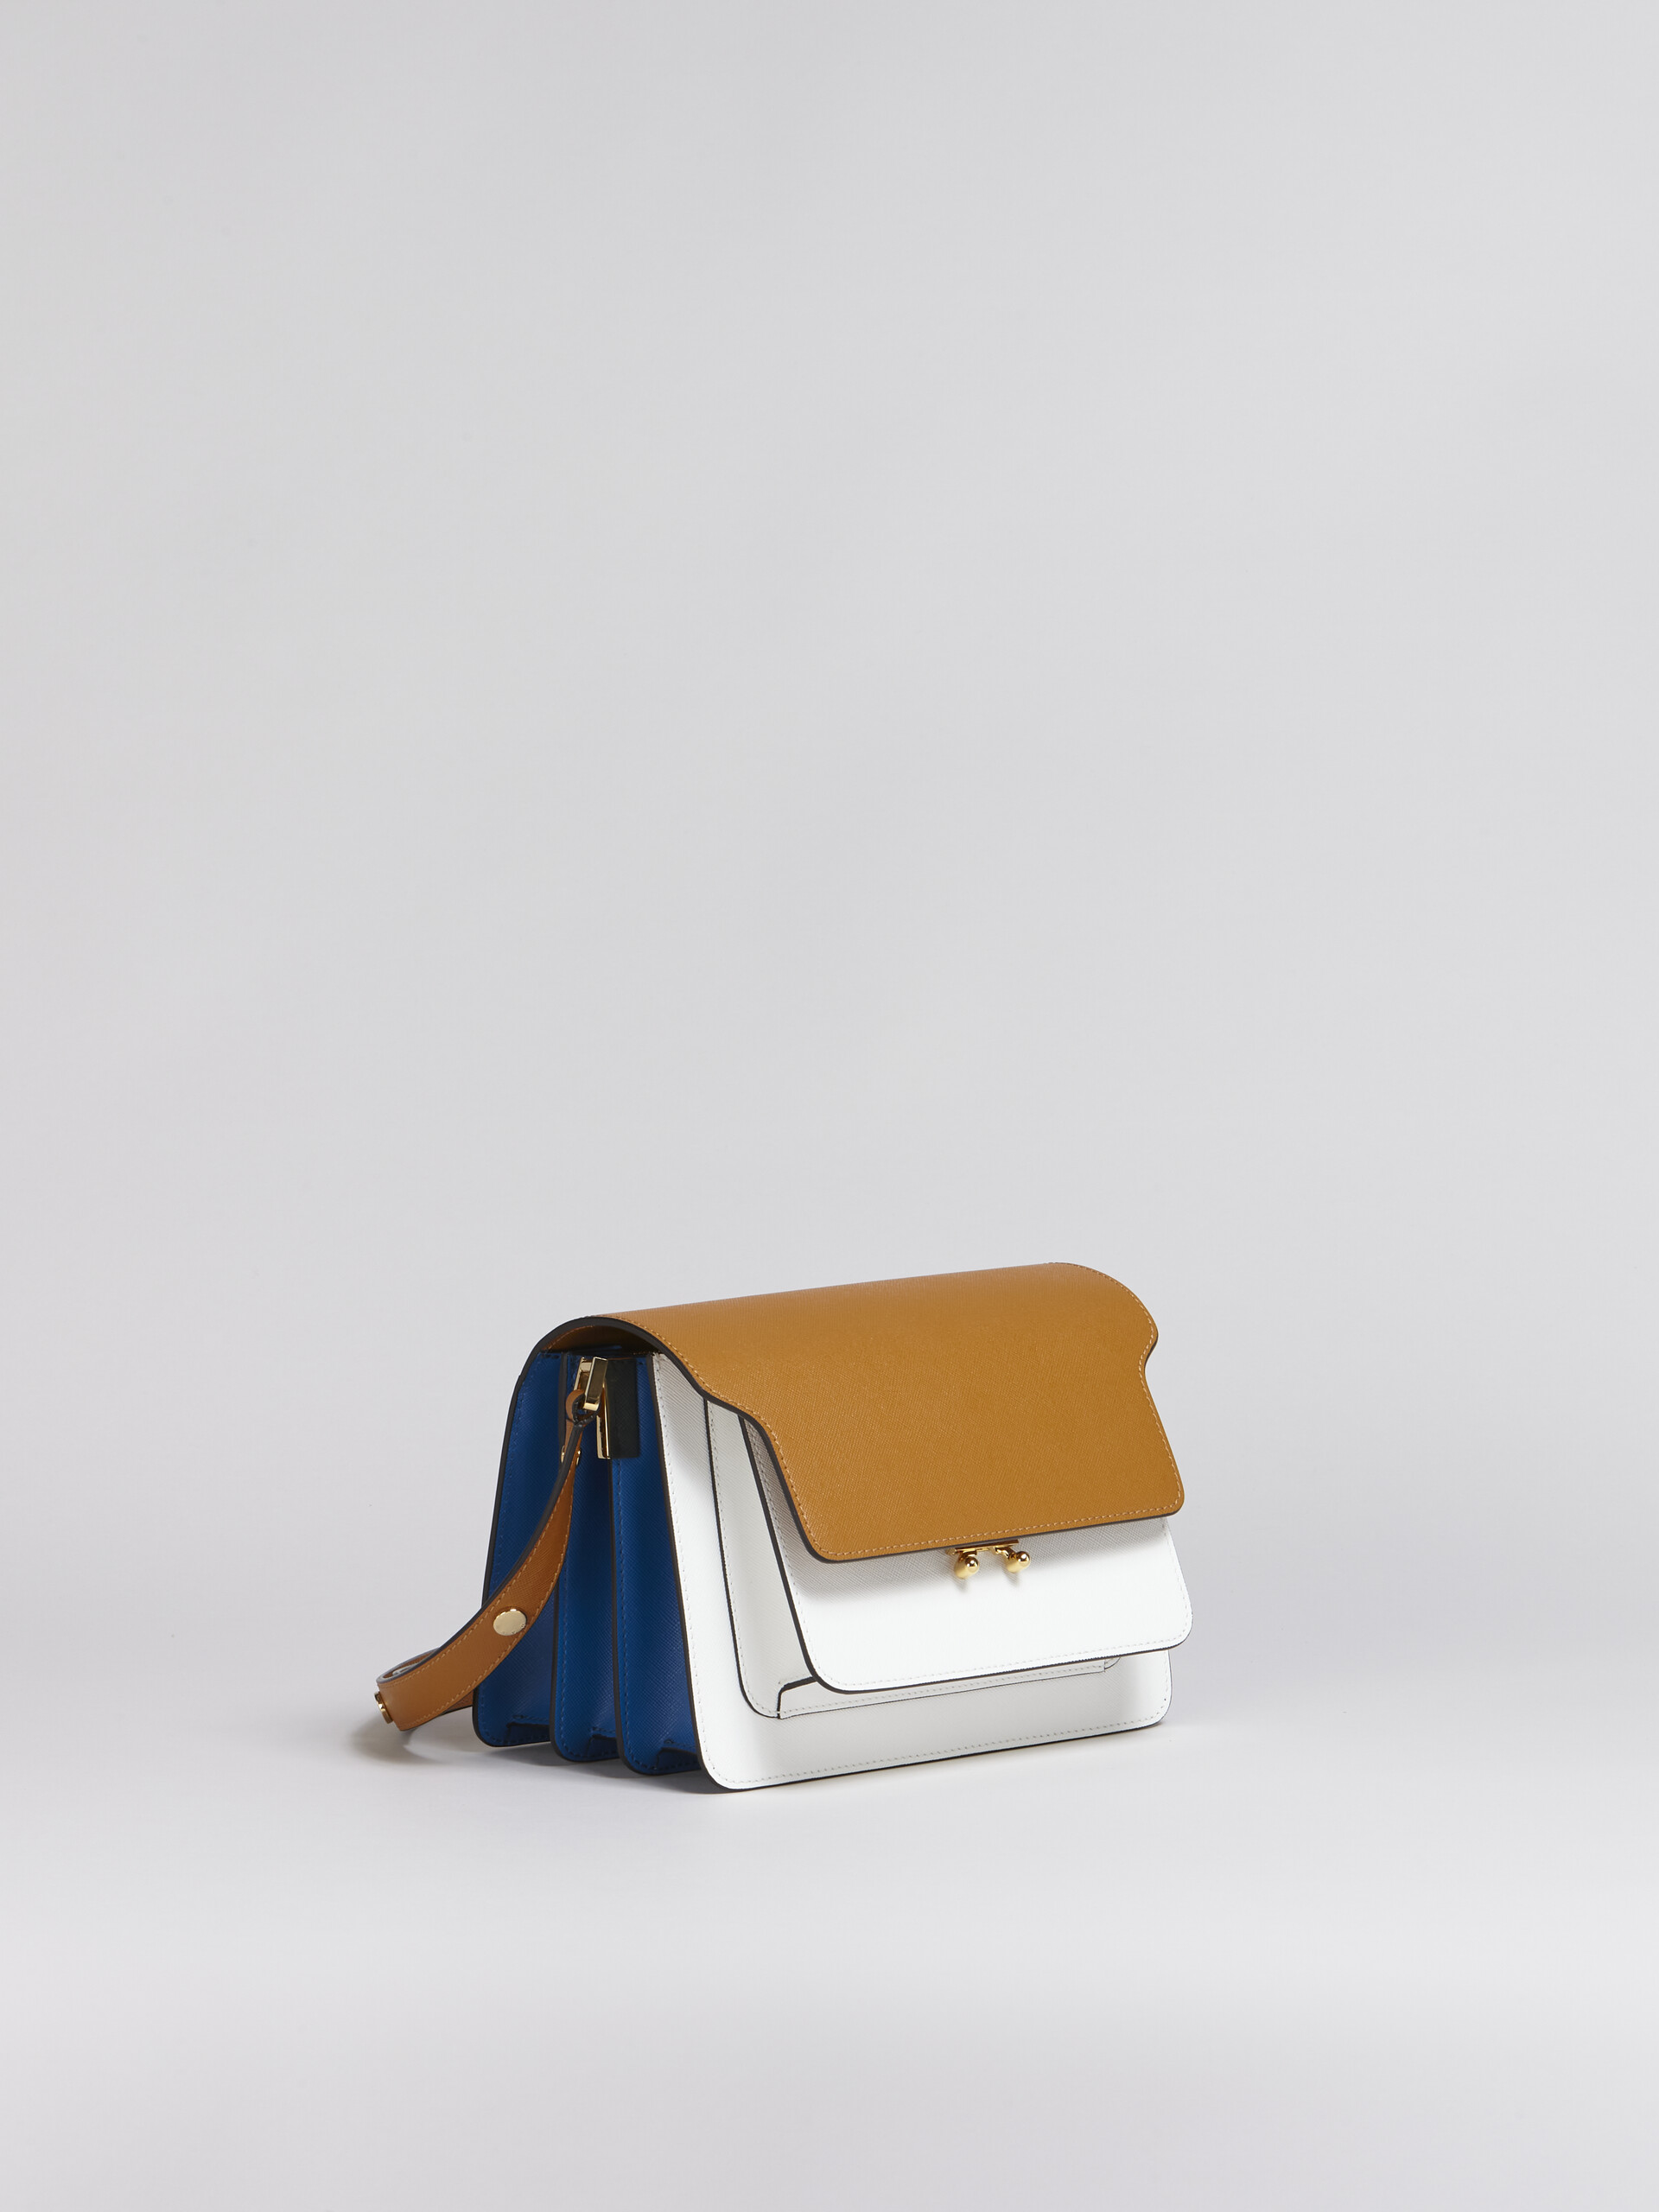 TRUNK medium bag in brown white and blue saffiano leather - Shoulder Bags - Image 5